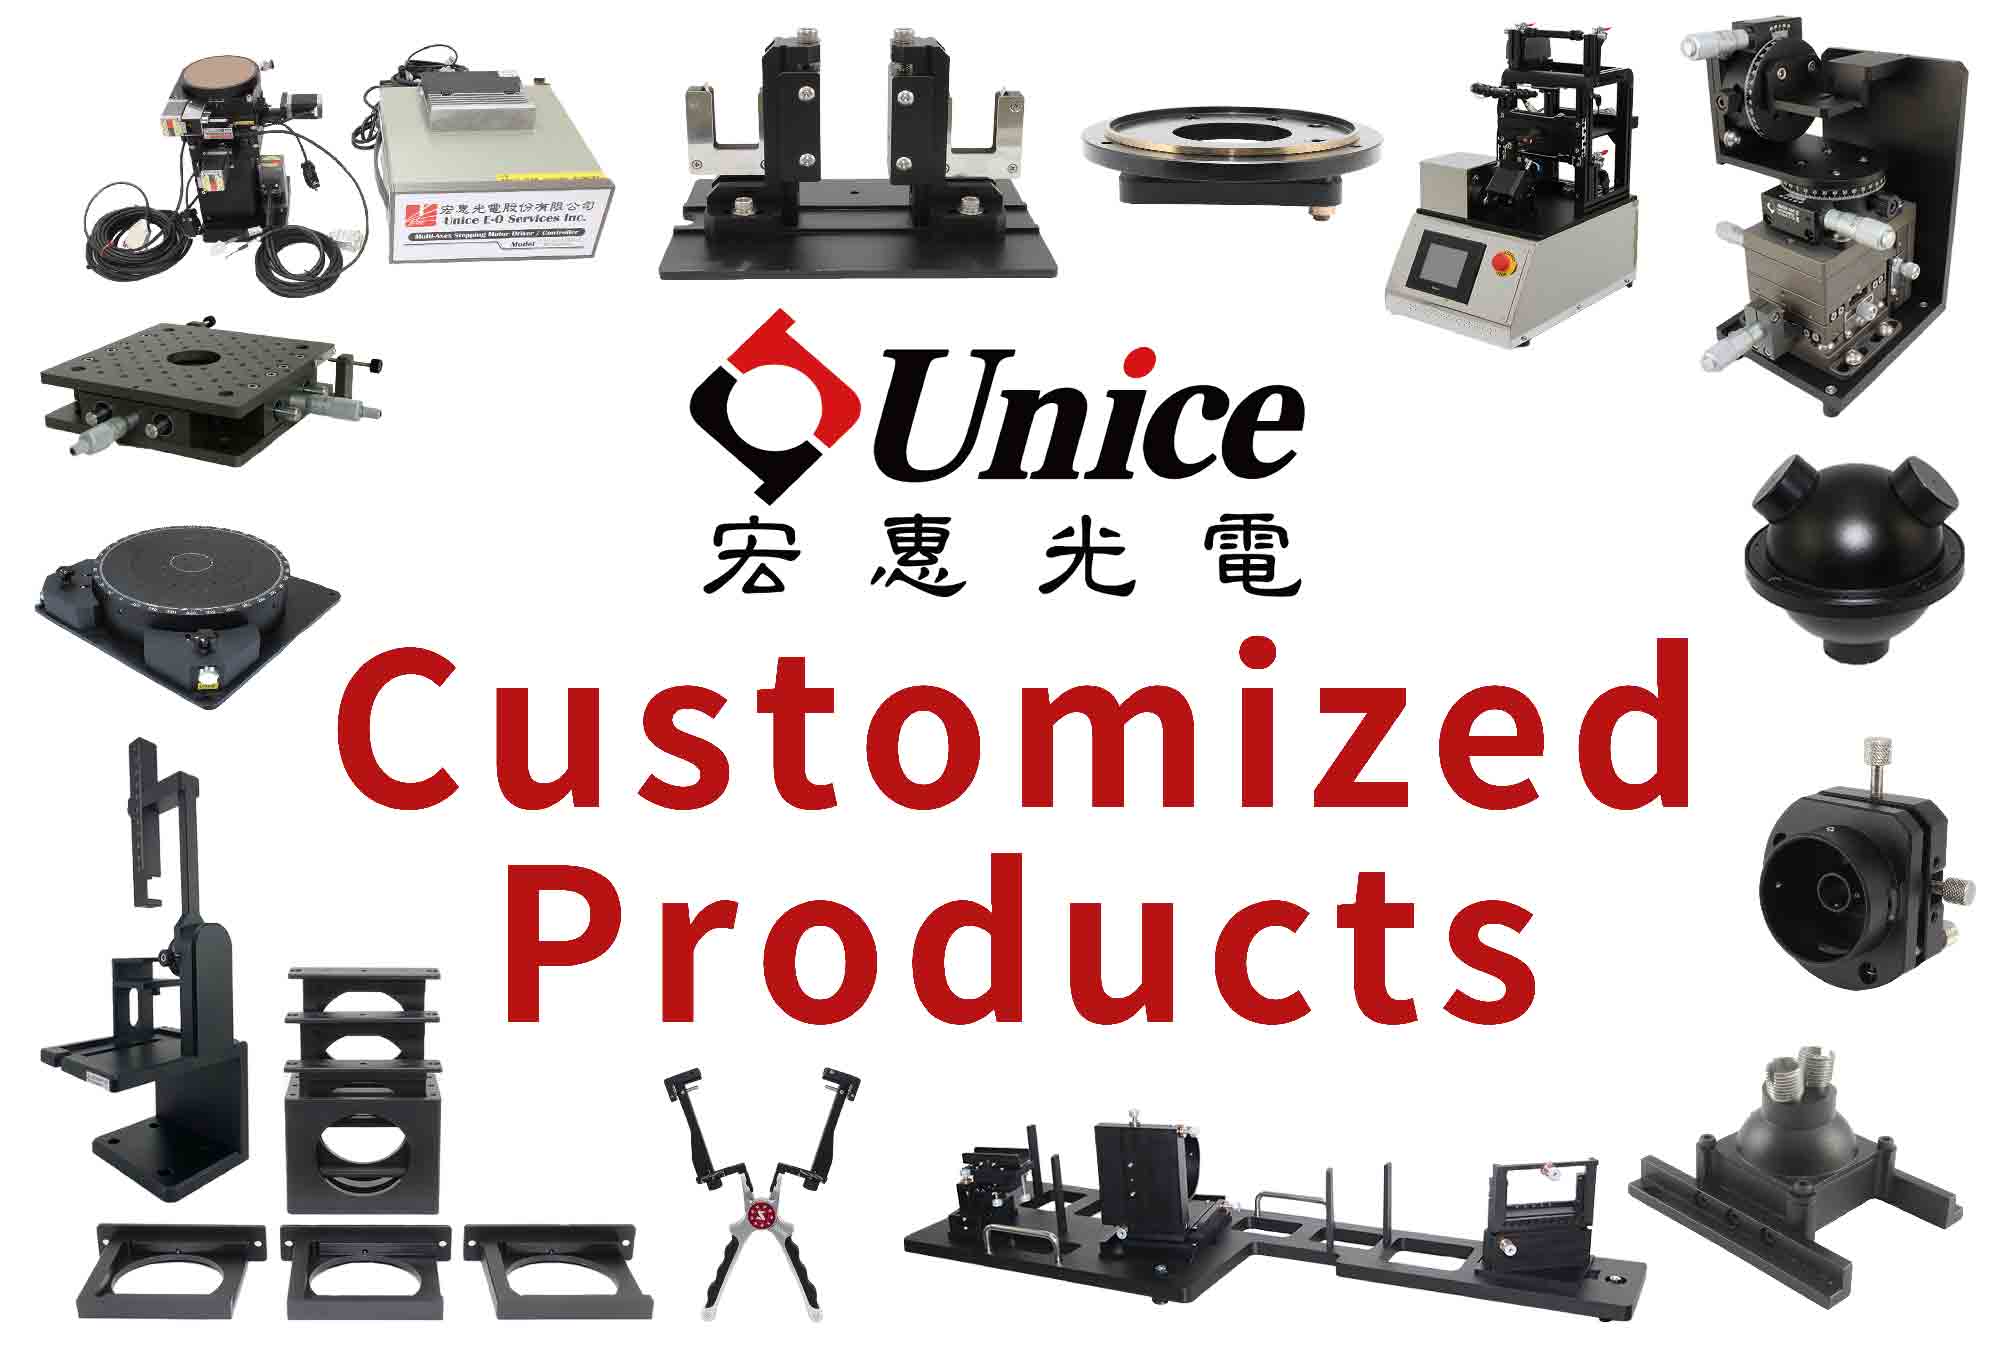 Customized Products